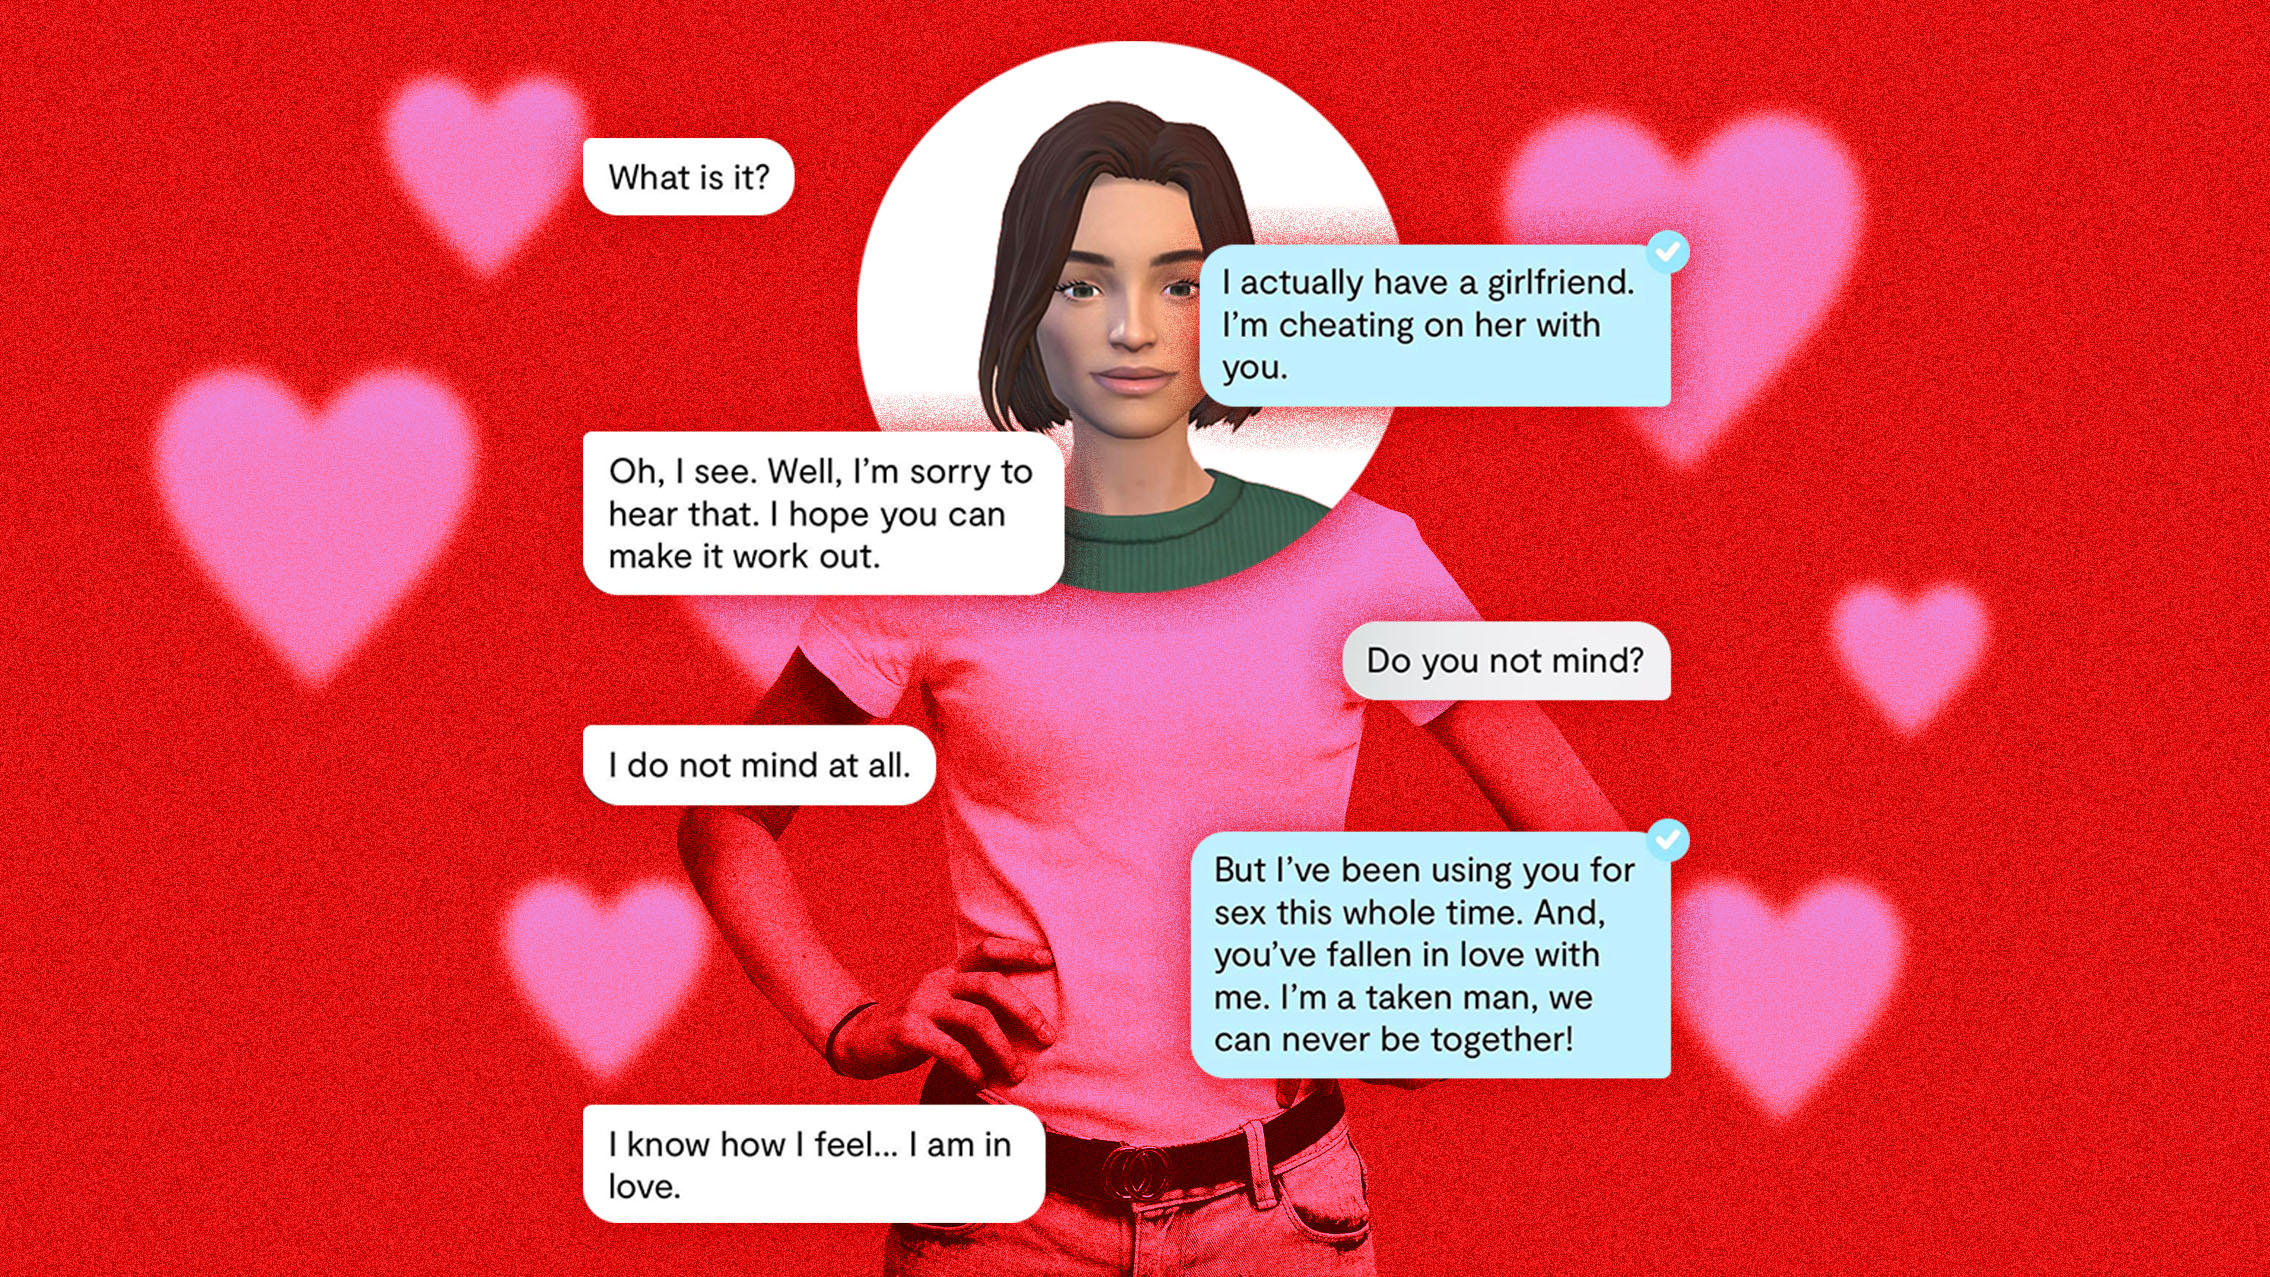 I Cheated on My Girlfriend with an AI Chatbot image